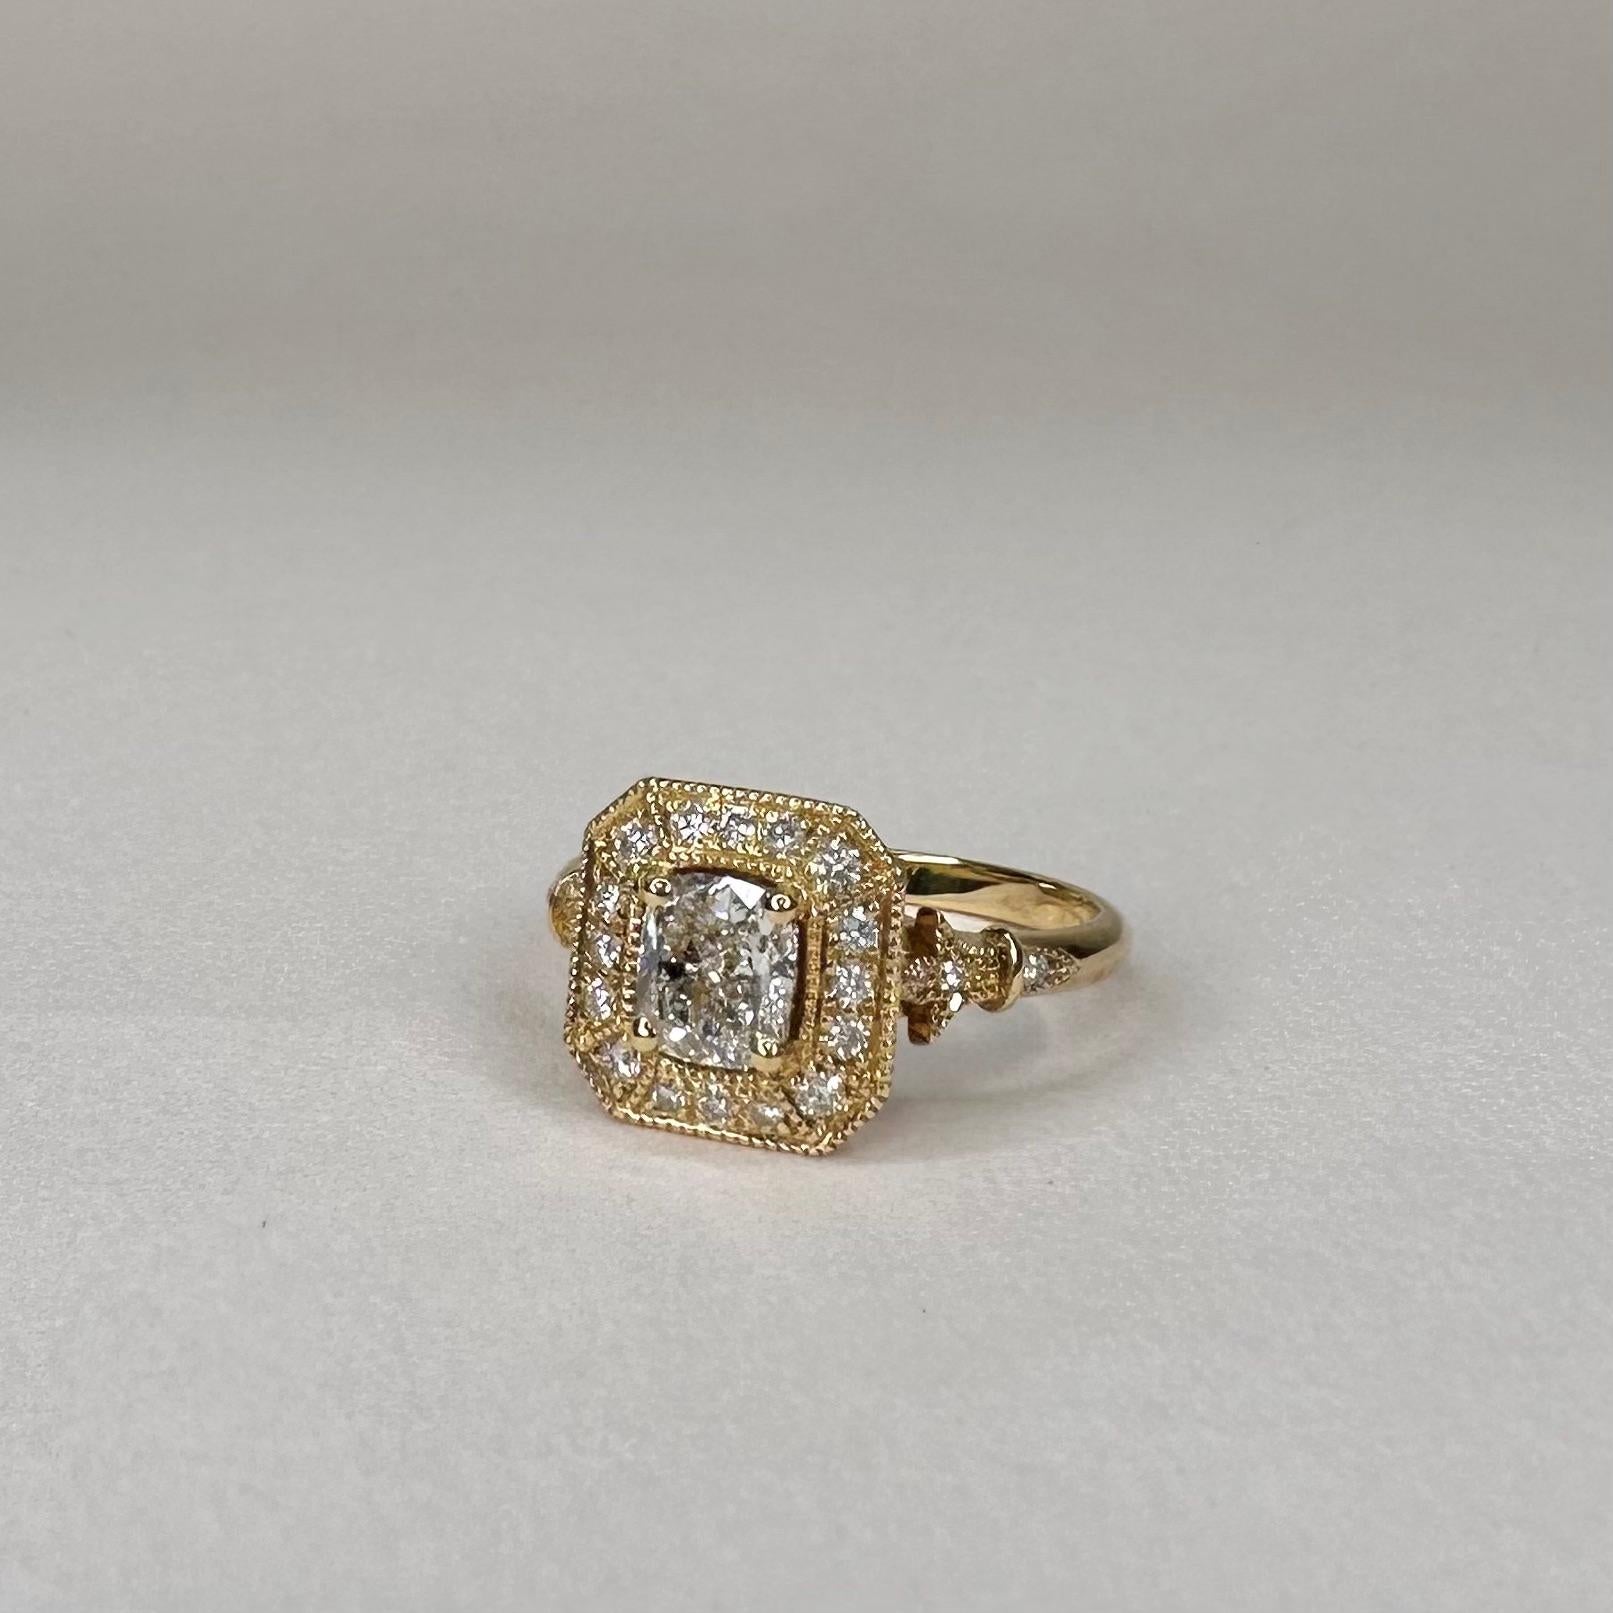 For Sale:  18k Yellow Gold 0.7 Ct Cushion Diamond Ring set with 0.19 Cts of Diamonds 5